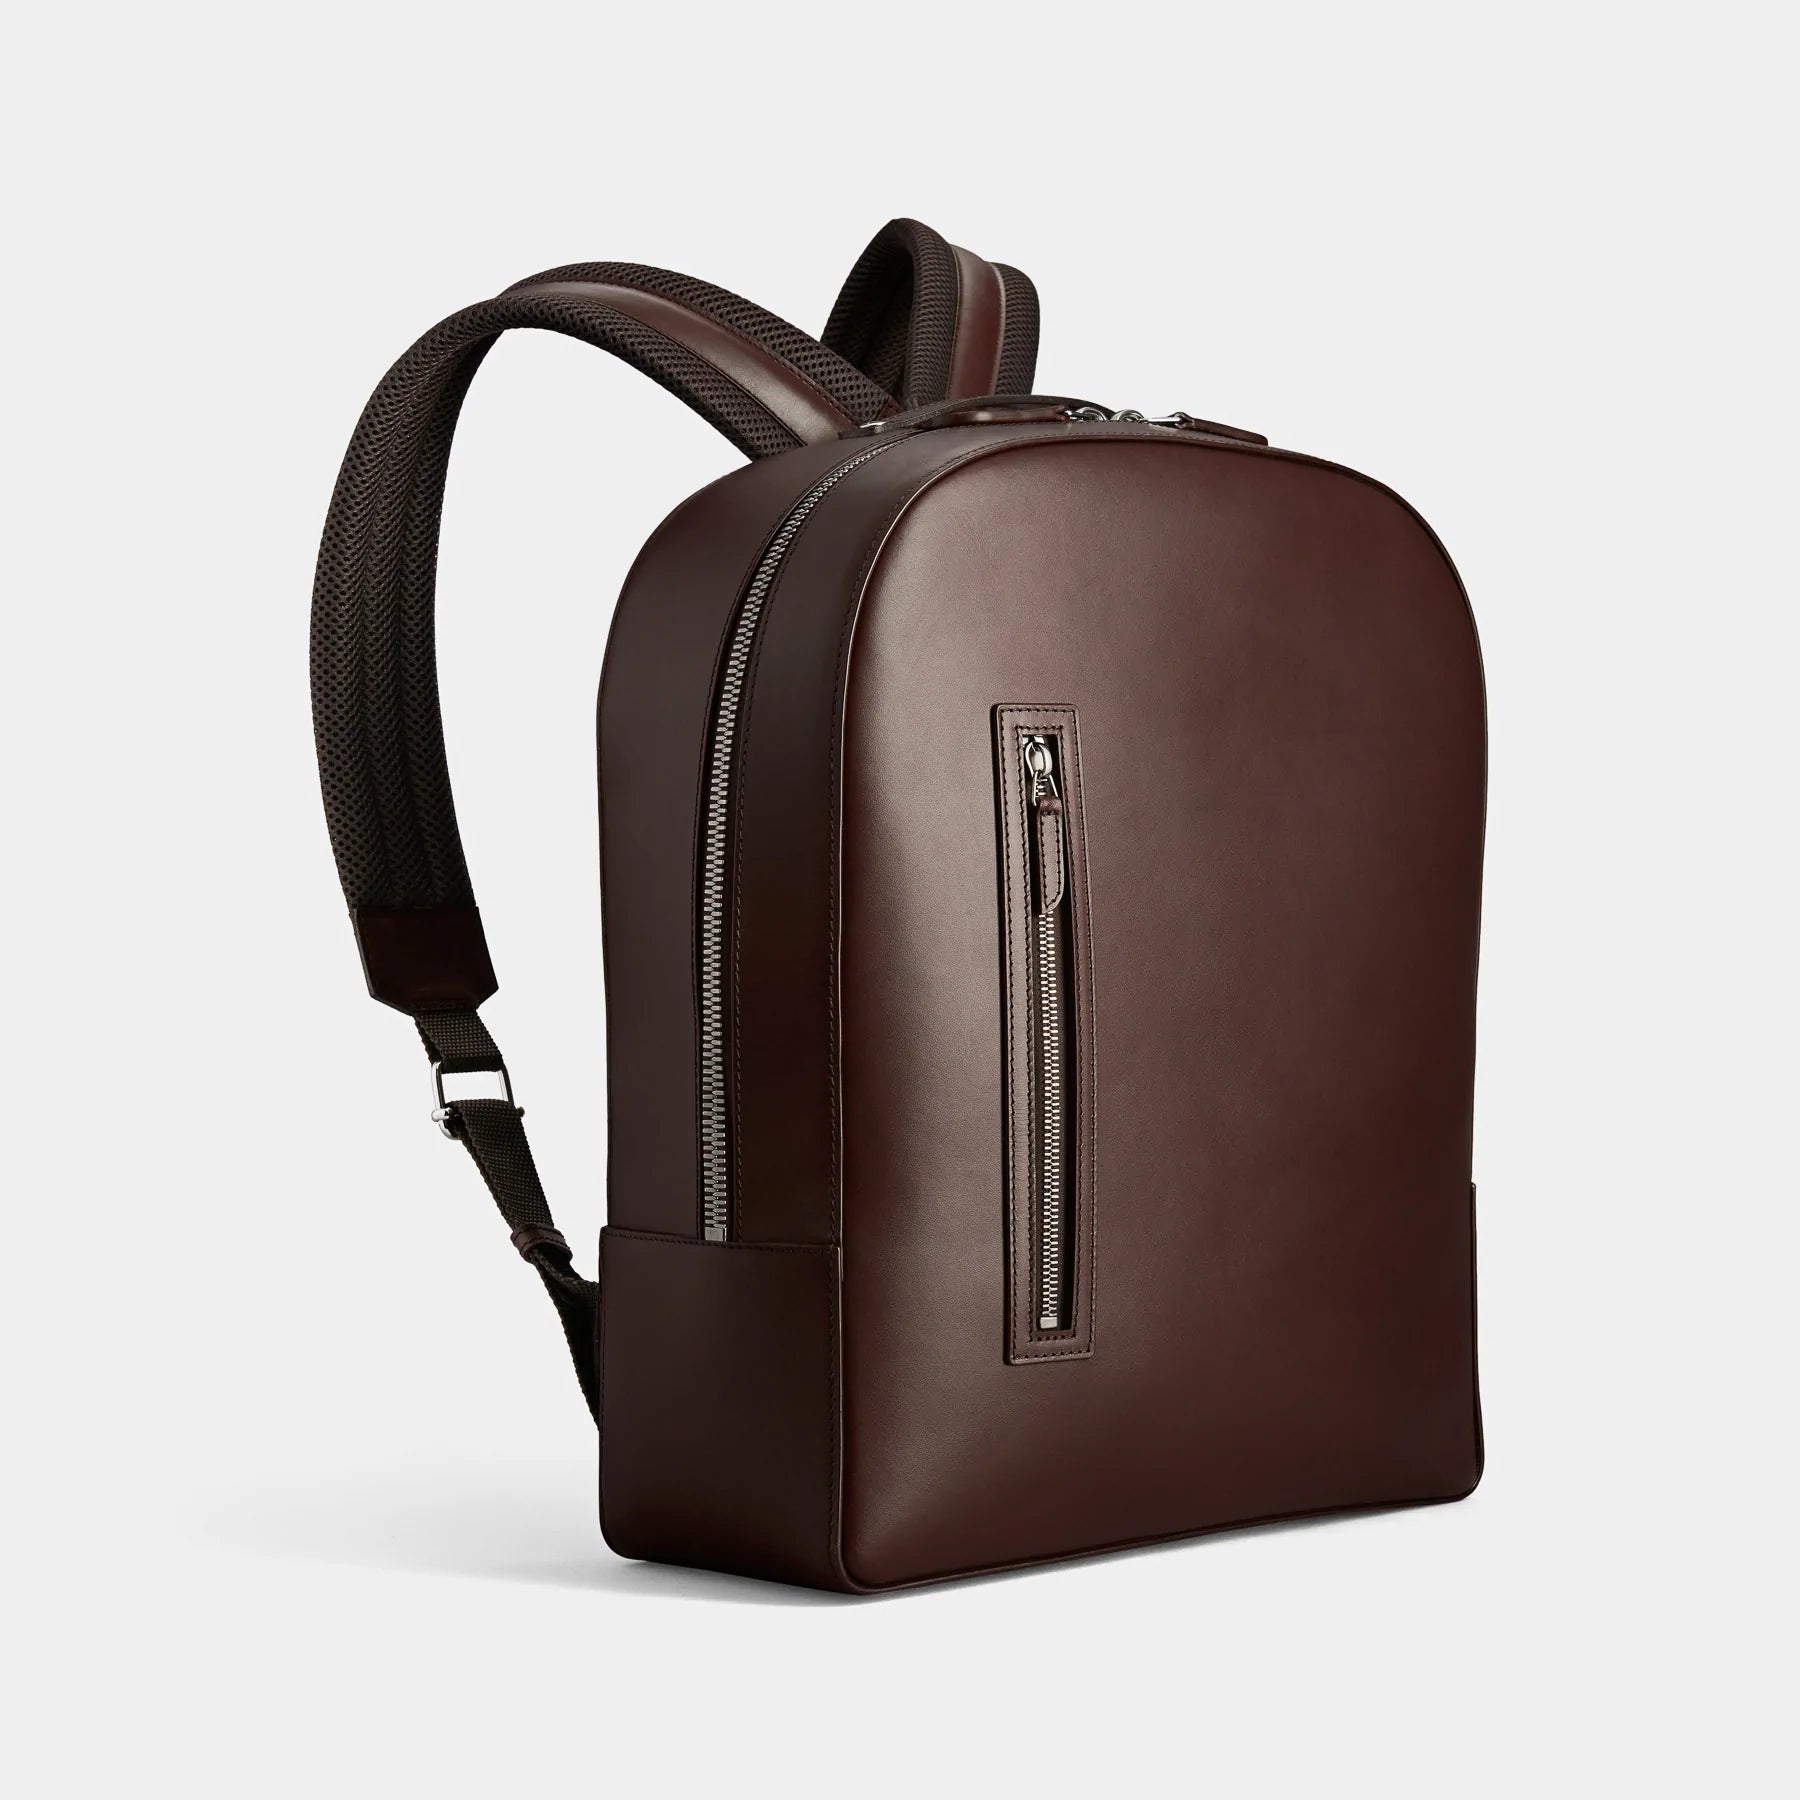 Bowen - Return Chocolate All-leather backpack - Fair Condition